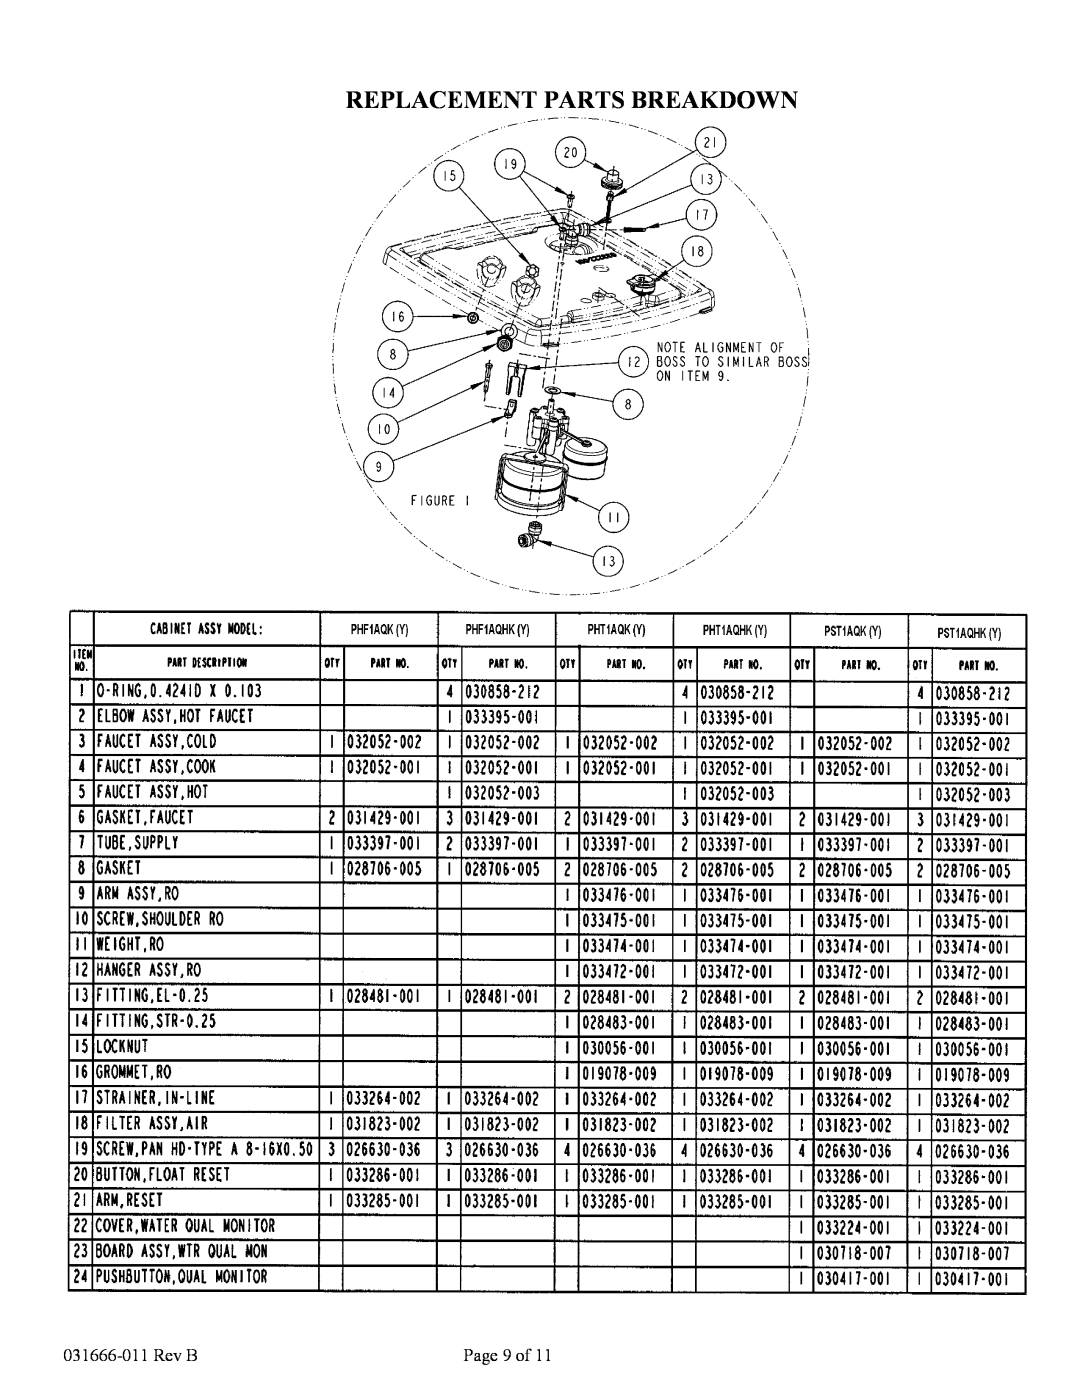 Oasis Concepts PHT1AQK specifications Replacement Parts Breakdown, 031666-011Rev B, Page 9 of 